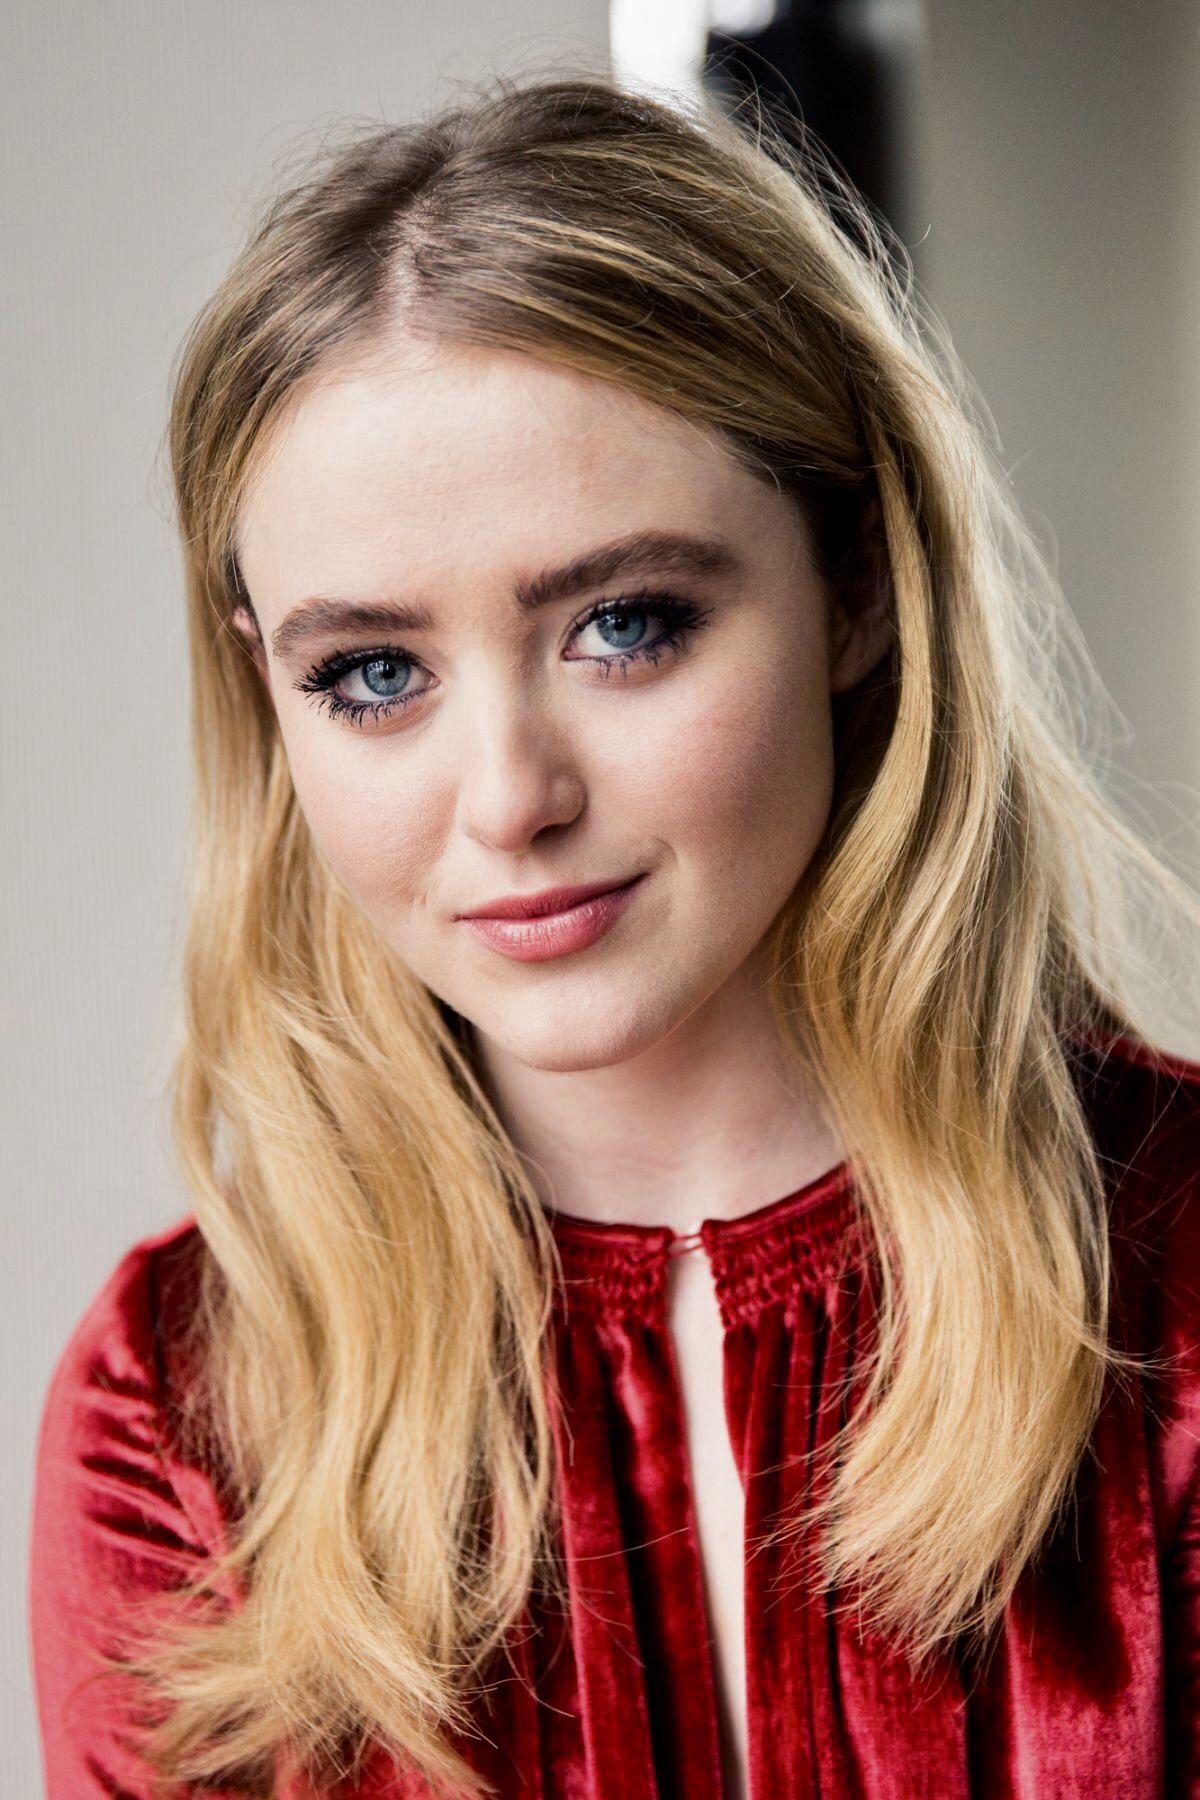 I see Kathryn Newton playing the role of Elena James